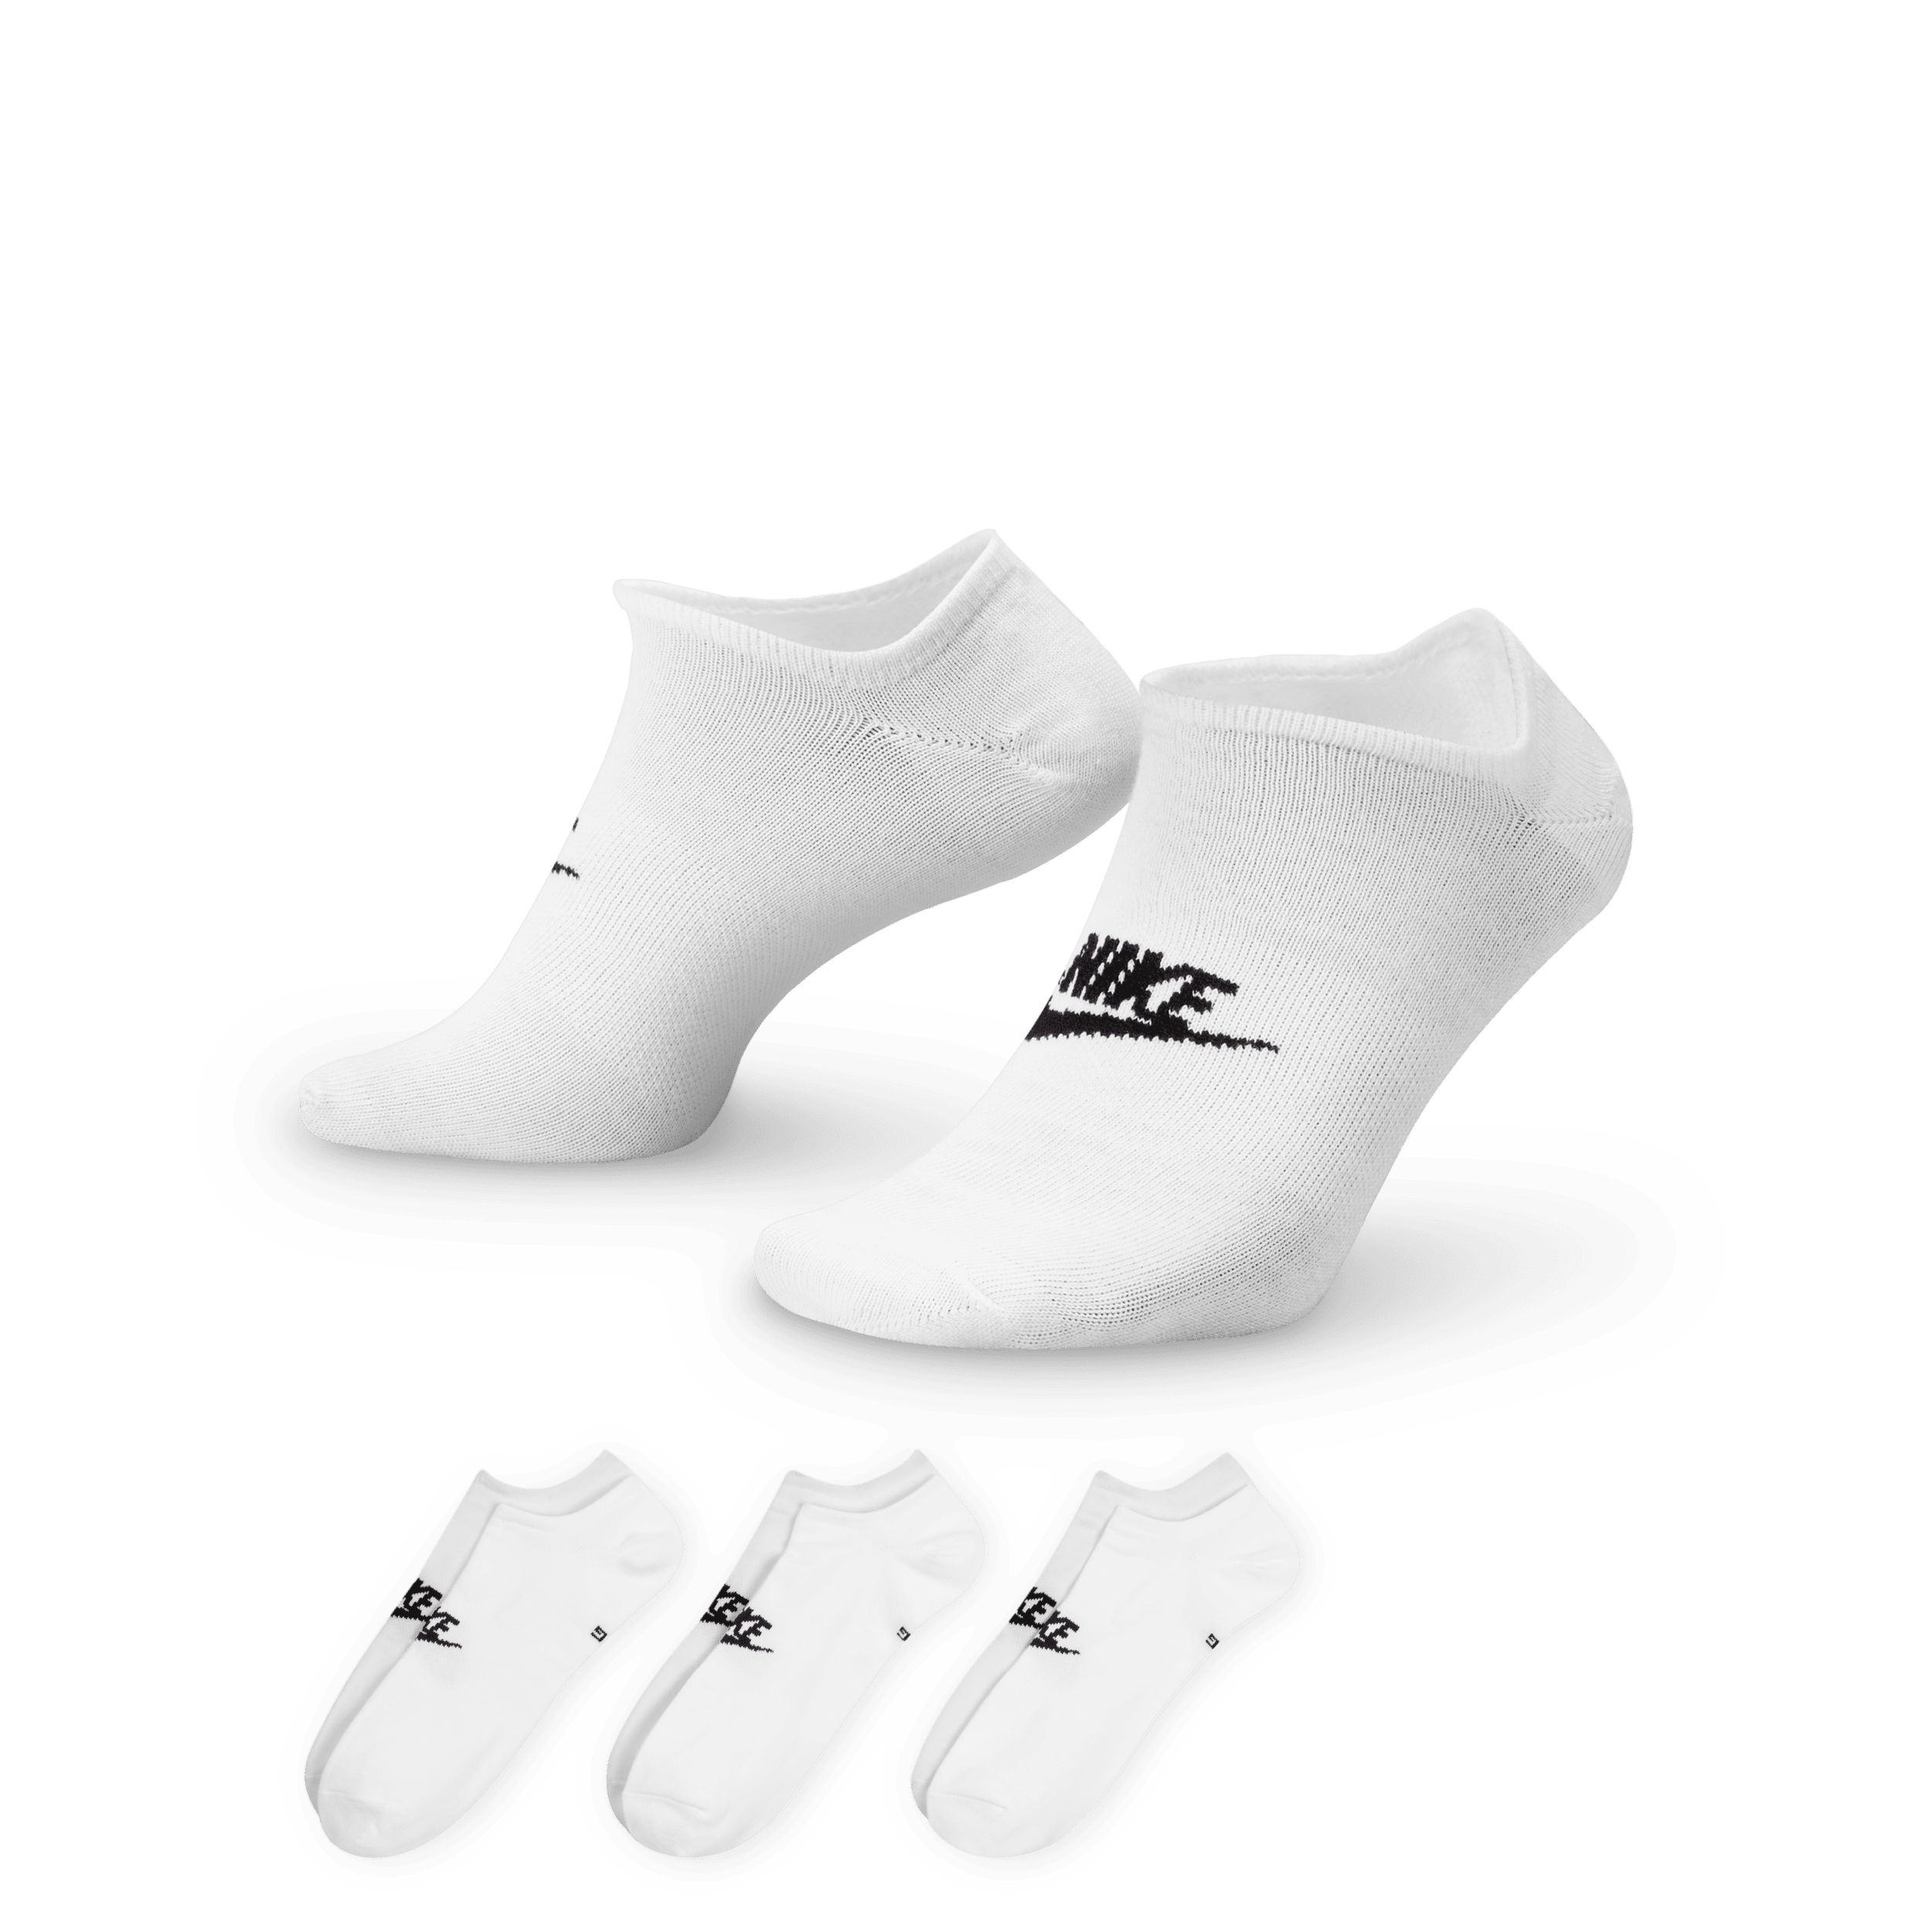 Nike Sportswear Everyday Essential Calcetines invisibles (3 pares) - Blanco